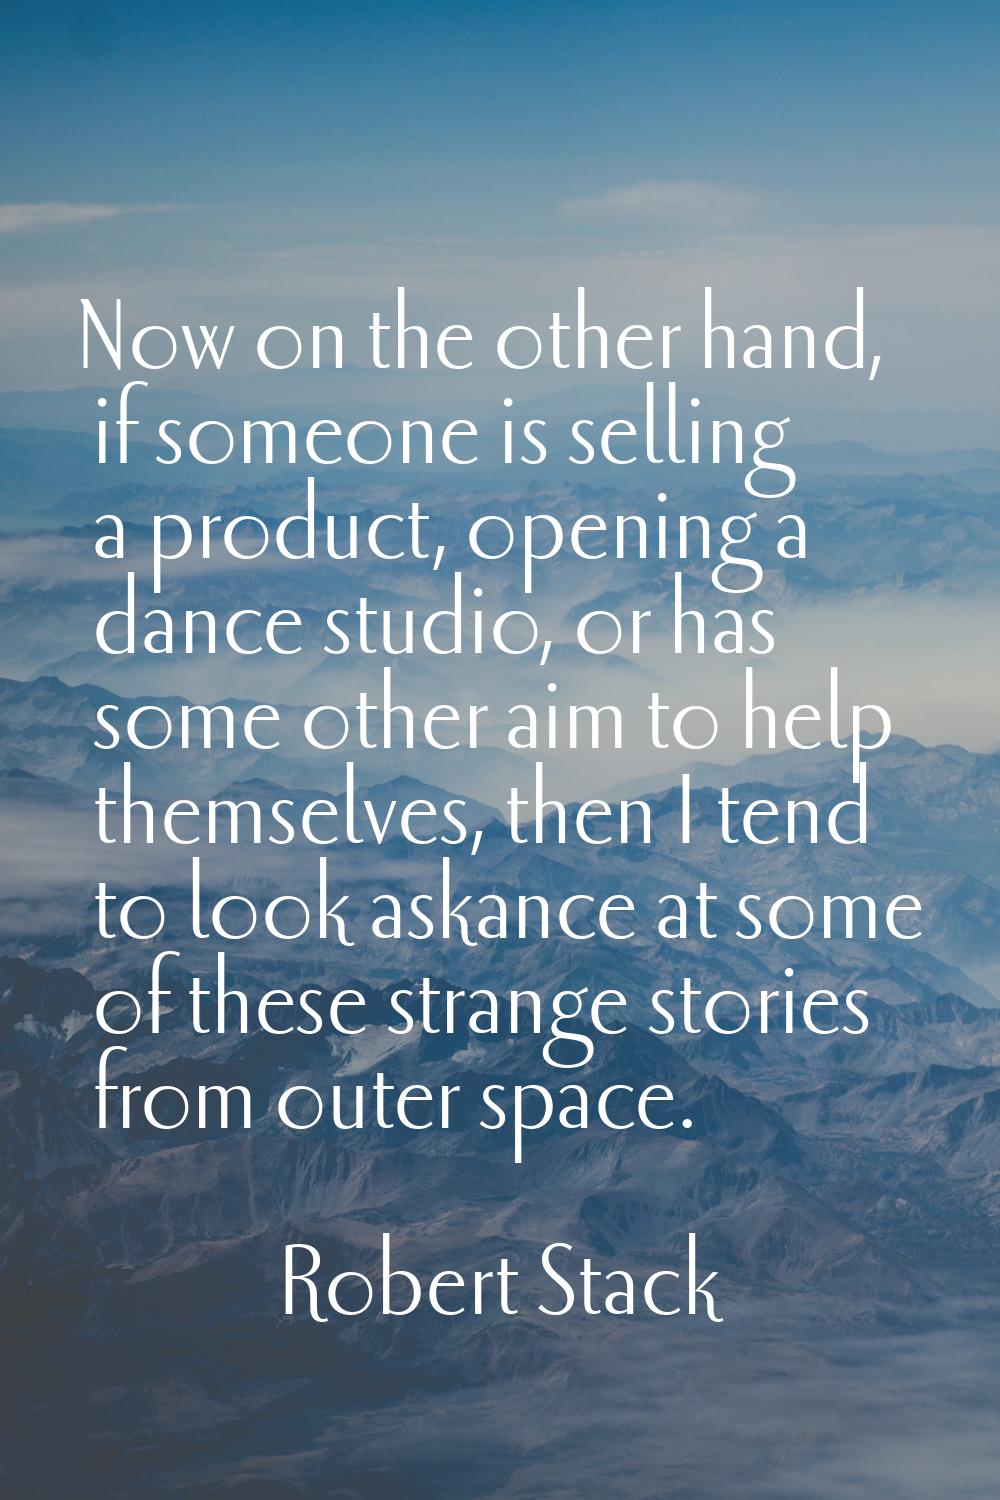 Now on the other hand, if someone is selling a product, opening a dance studio, or has some other a